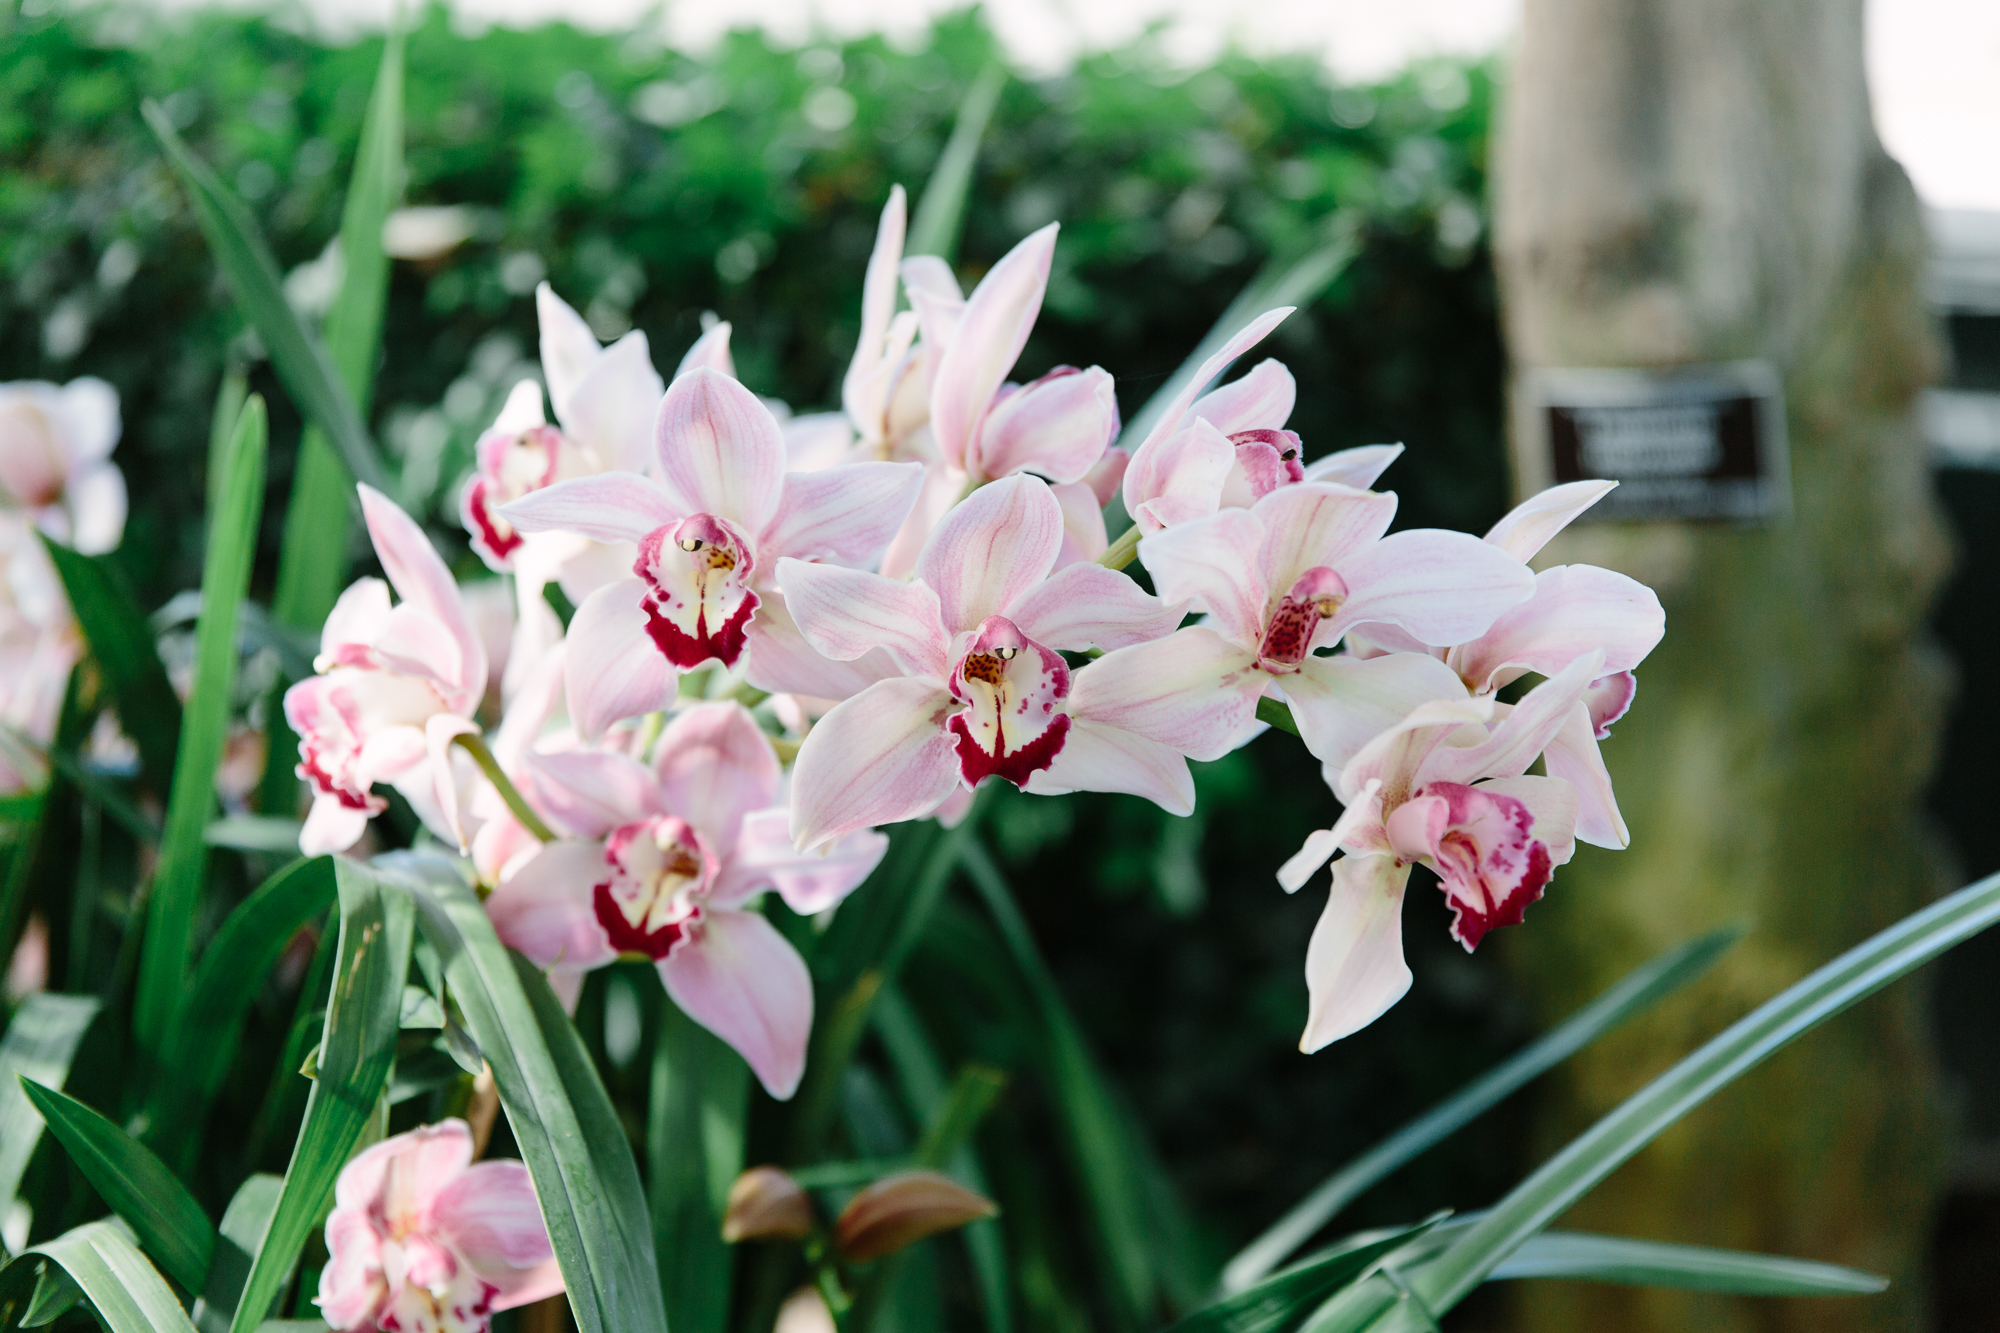 nyc guide: the orchid show at the new york botanical garden | york